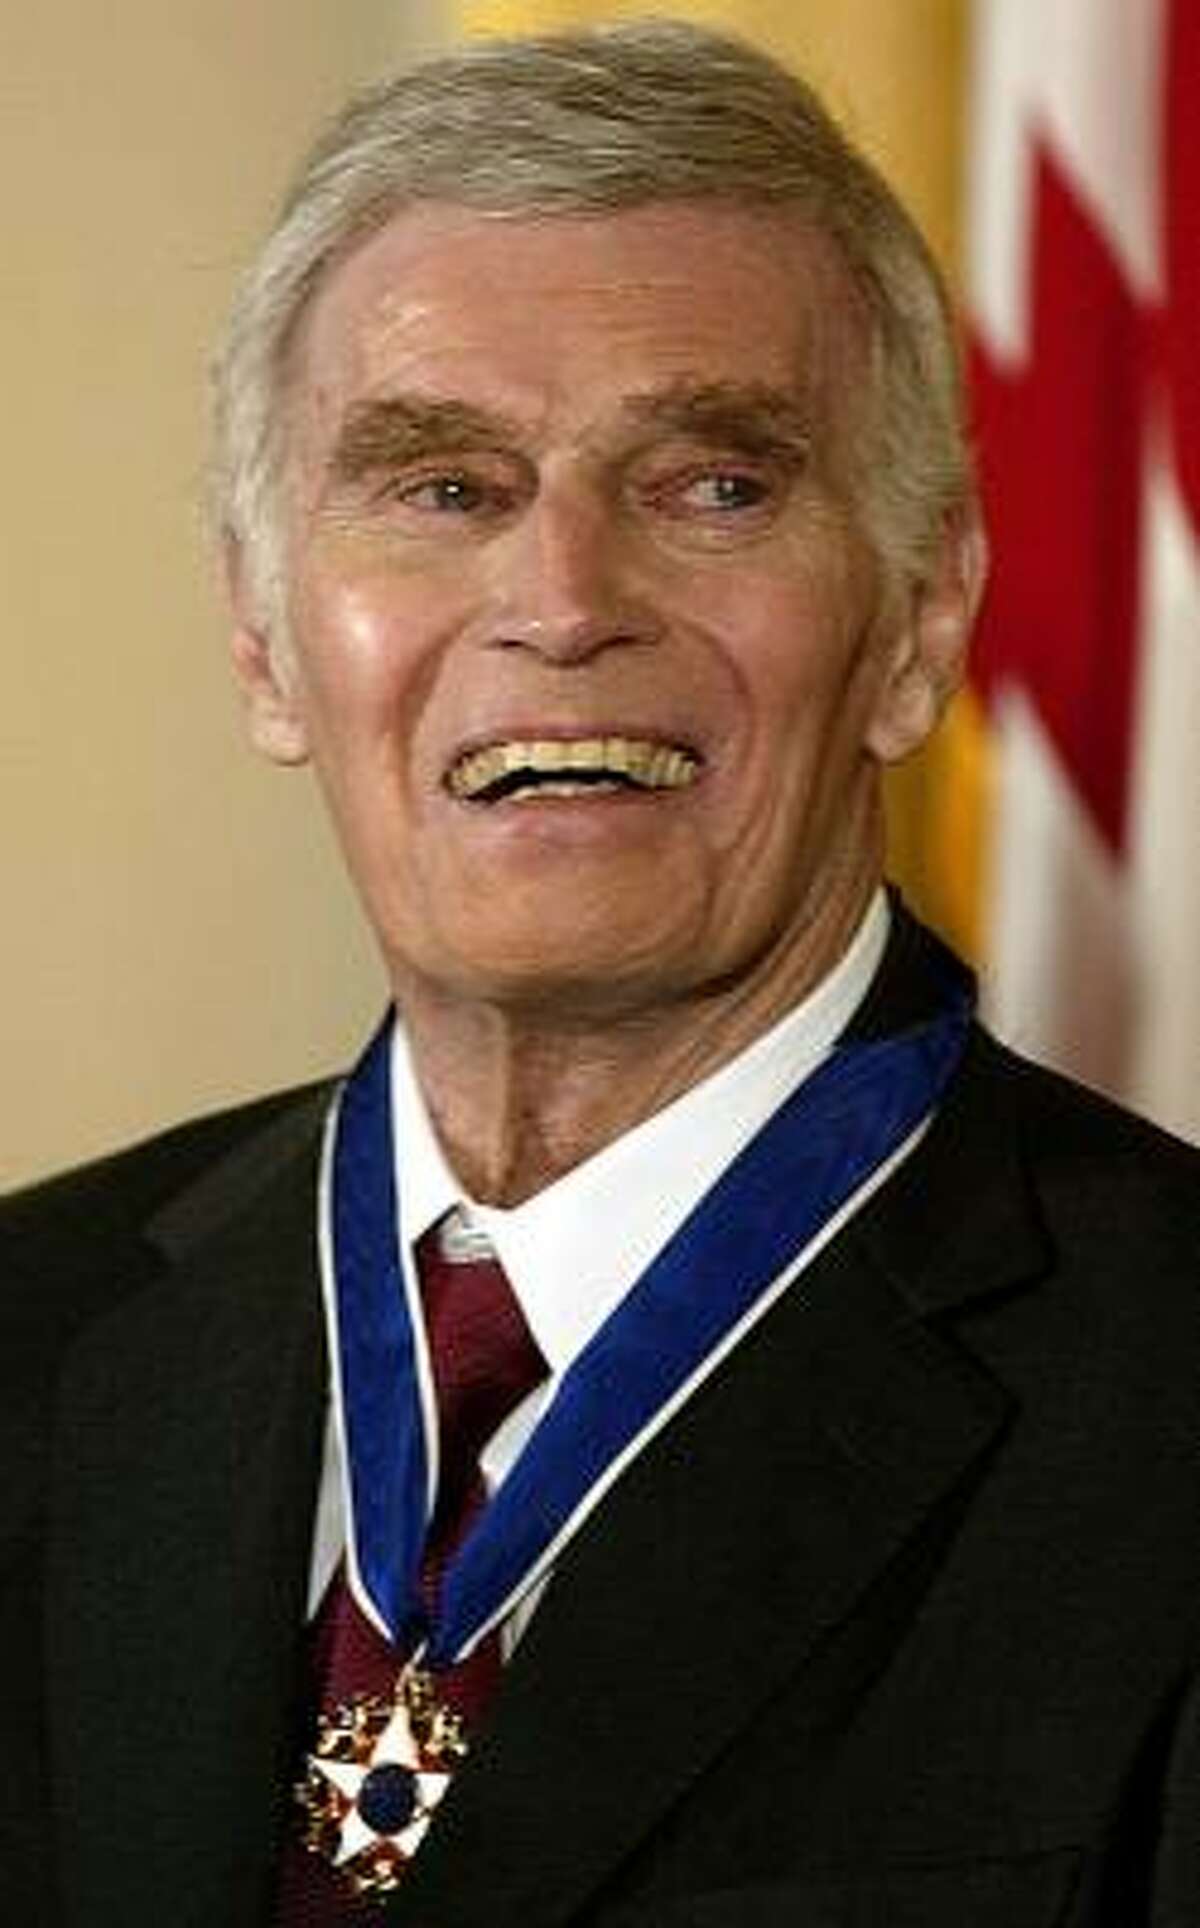 Actor Charlton Heston received the Presidential Medal of Freedom at the White House on July 23, 2003.